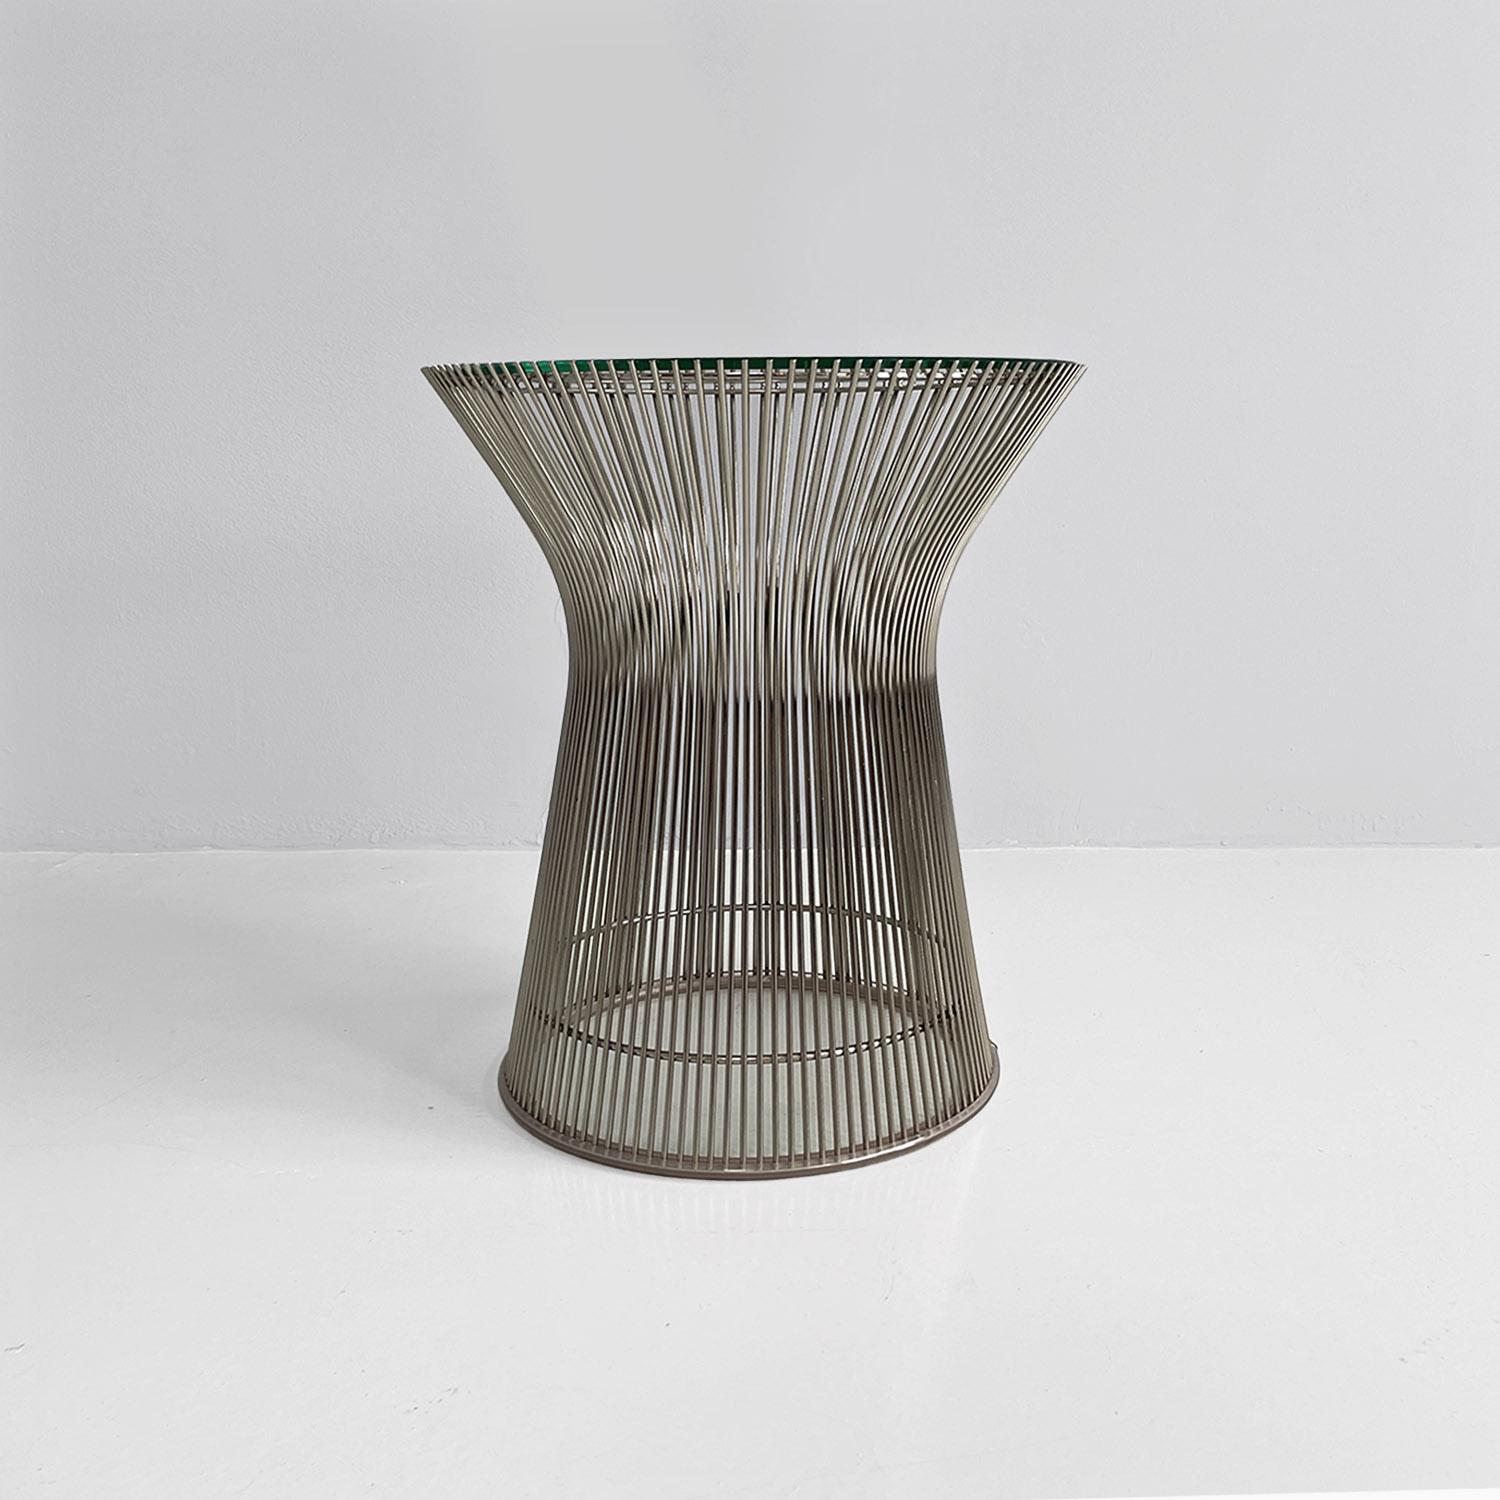 Mid-20th Century American modern steel and crystal side tables by Warren Platner for Knoll, 1966 For Sale